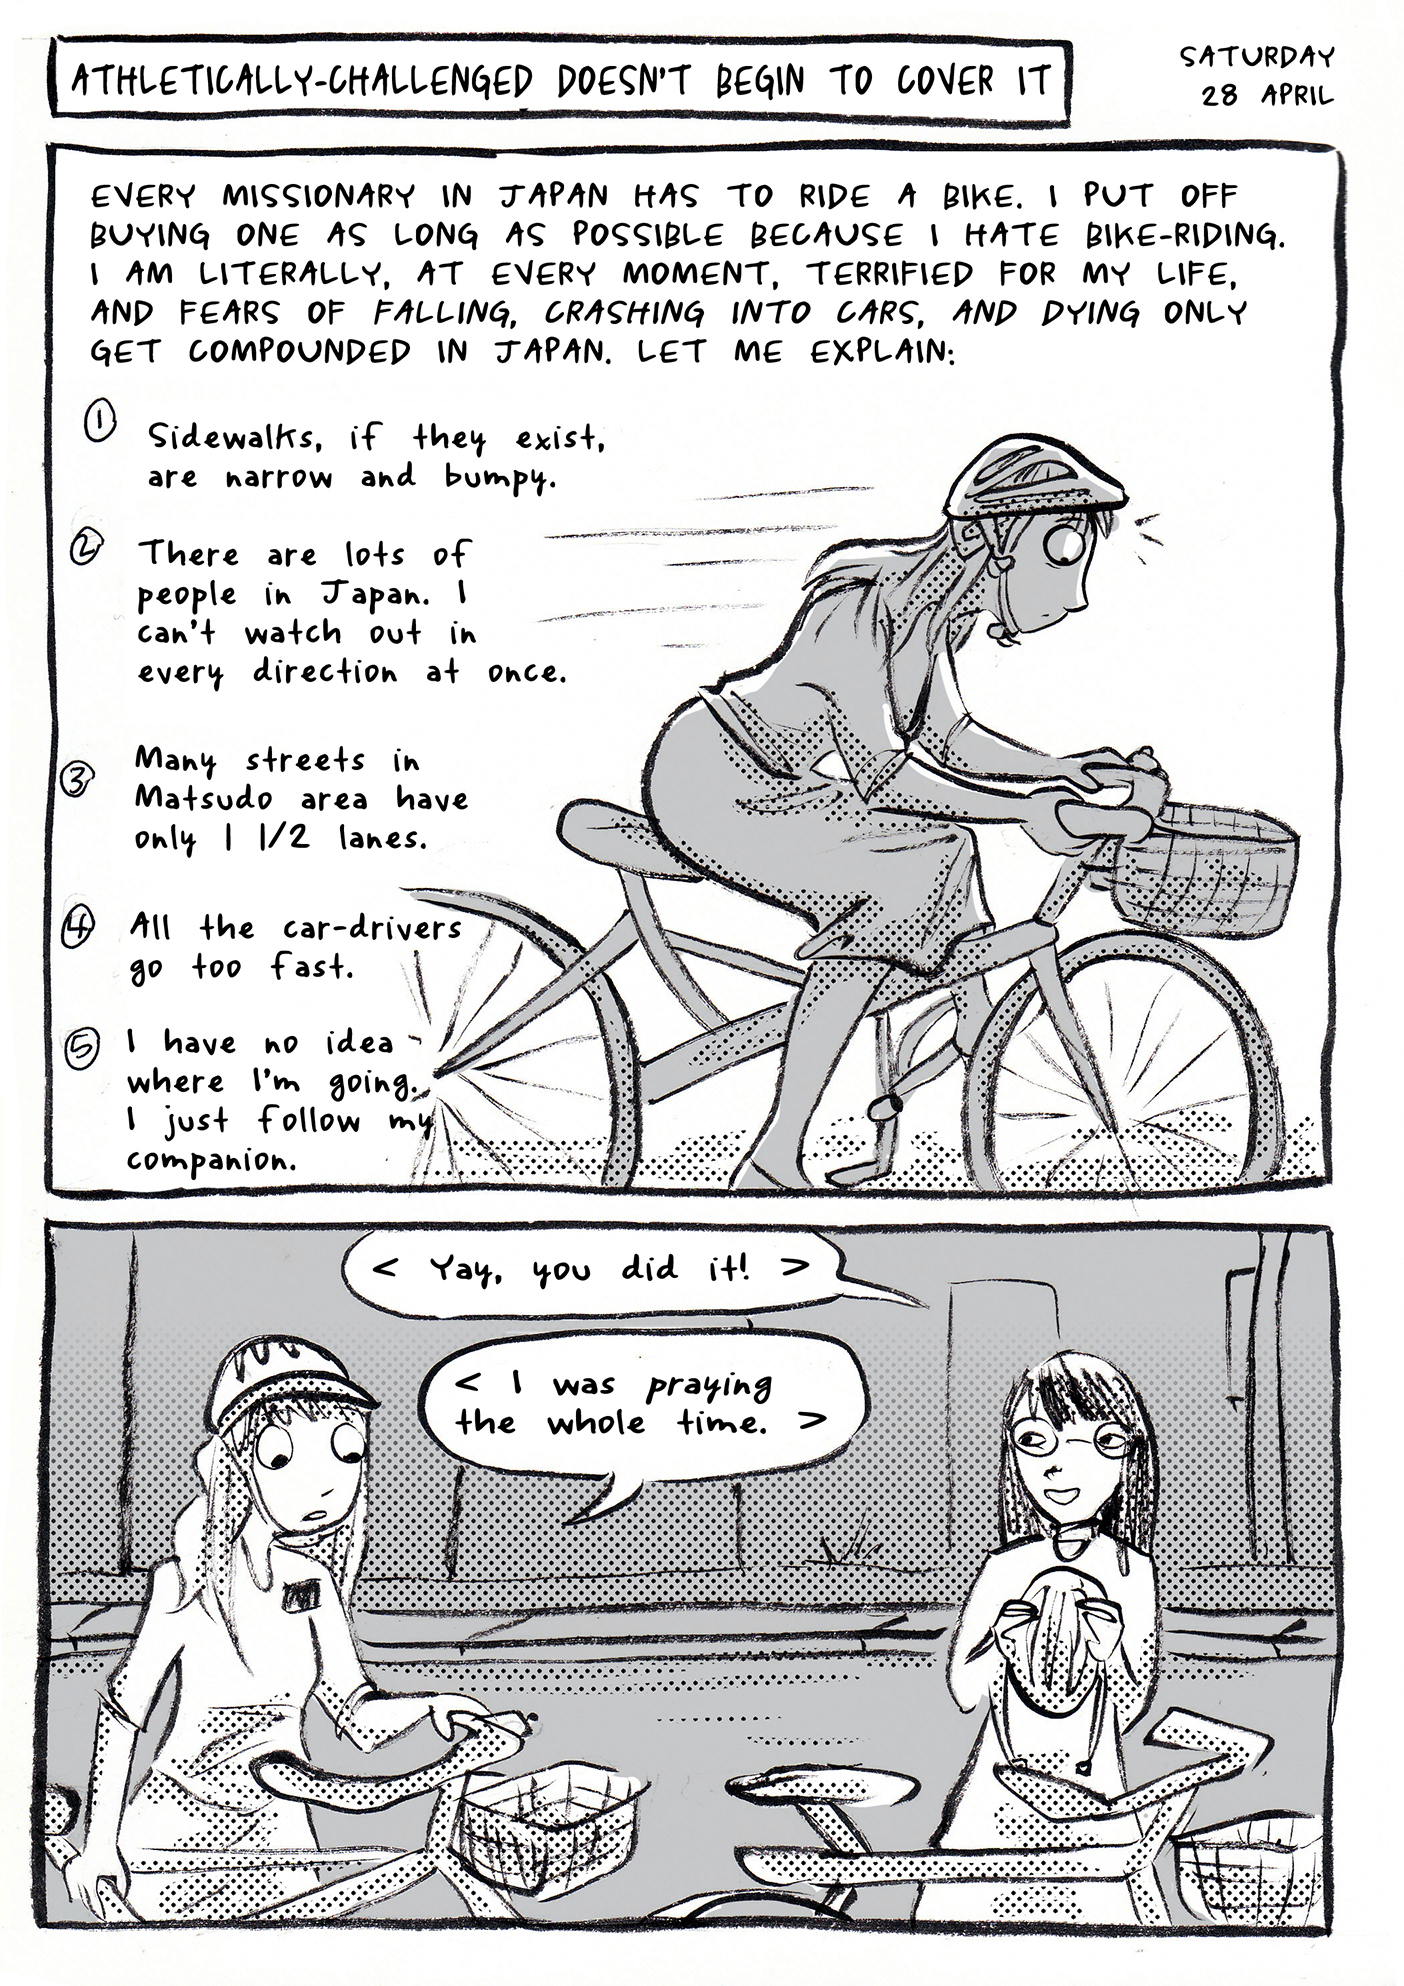 A page from Dendo, the comic-strip missionary journal of Brittany Olsen. This page shows a sister missionary riding a bike.